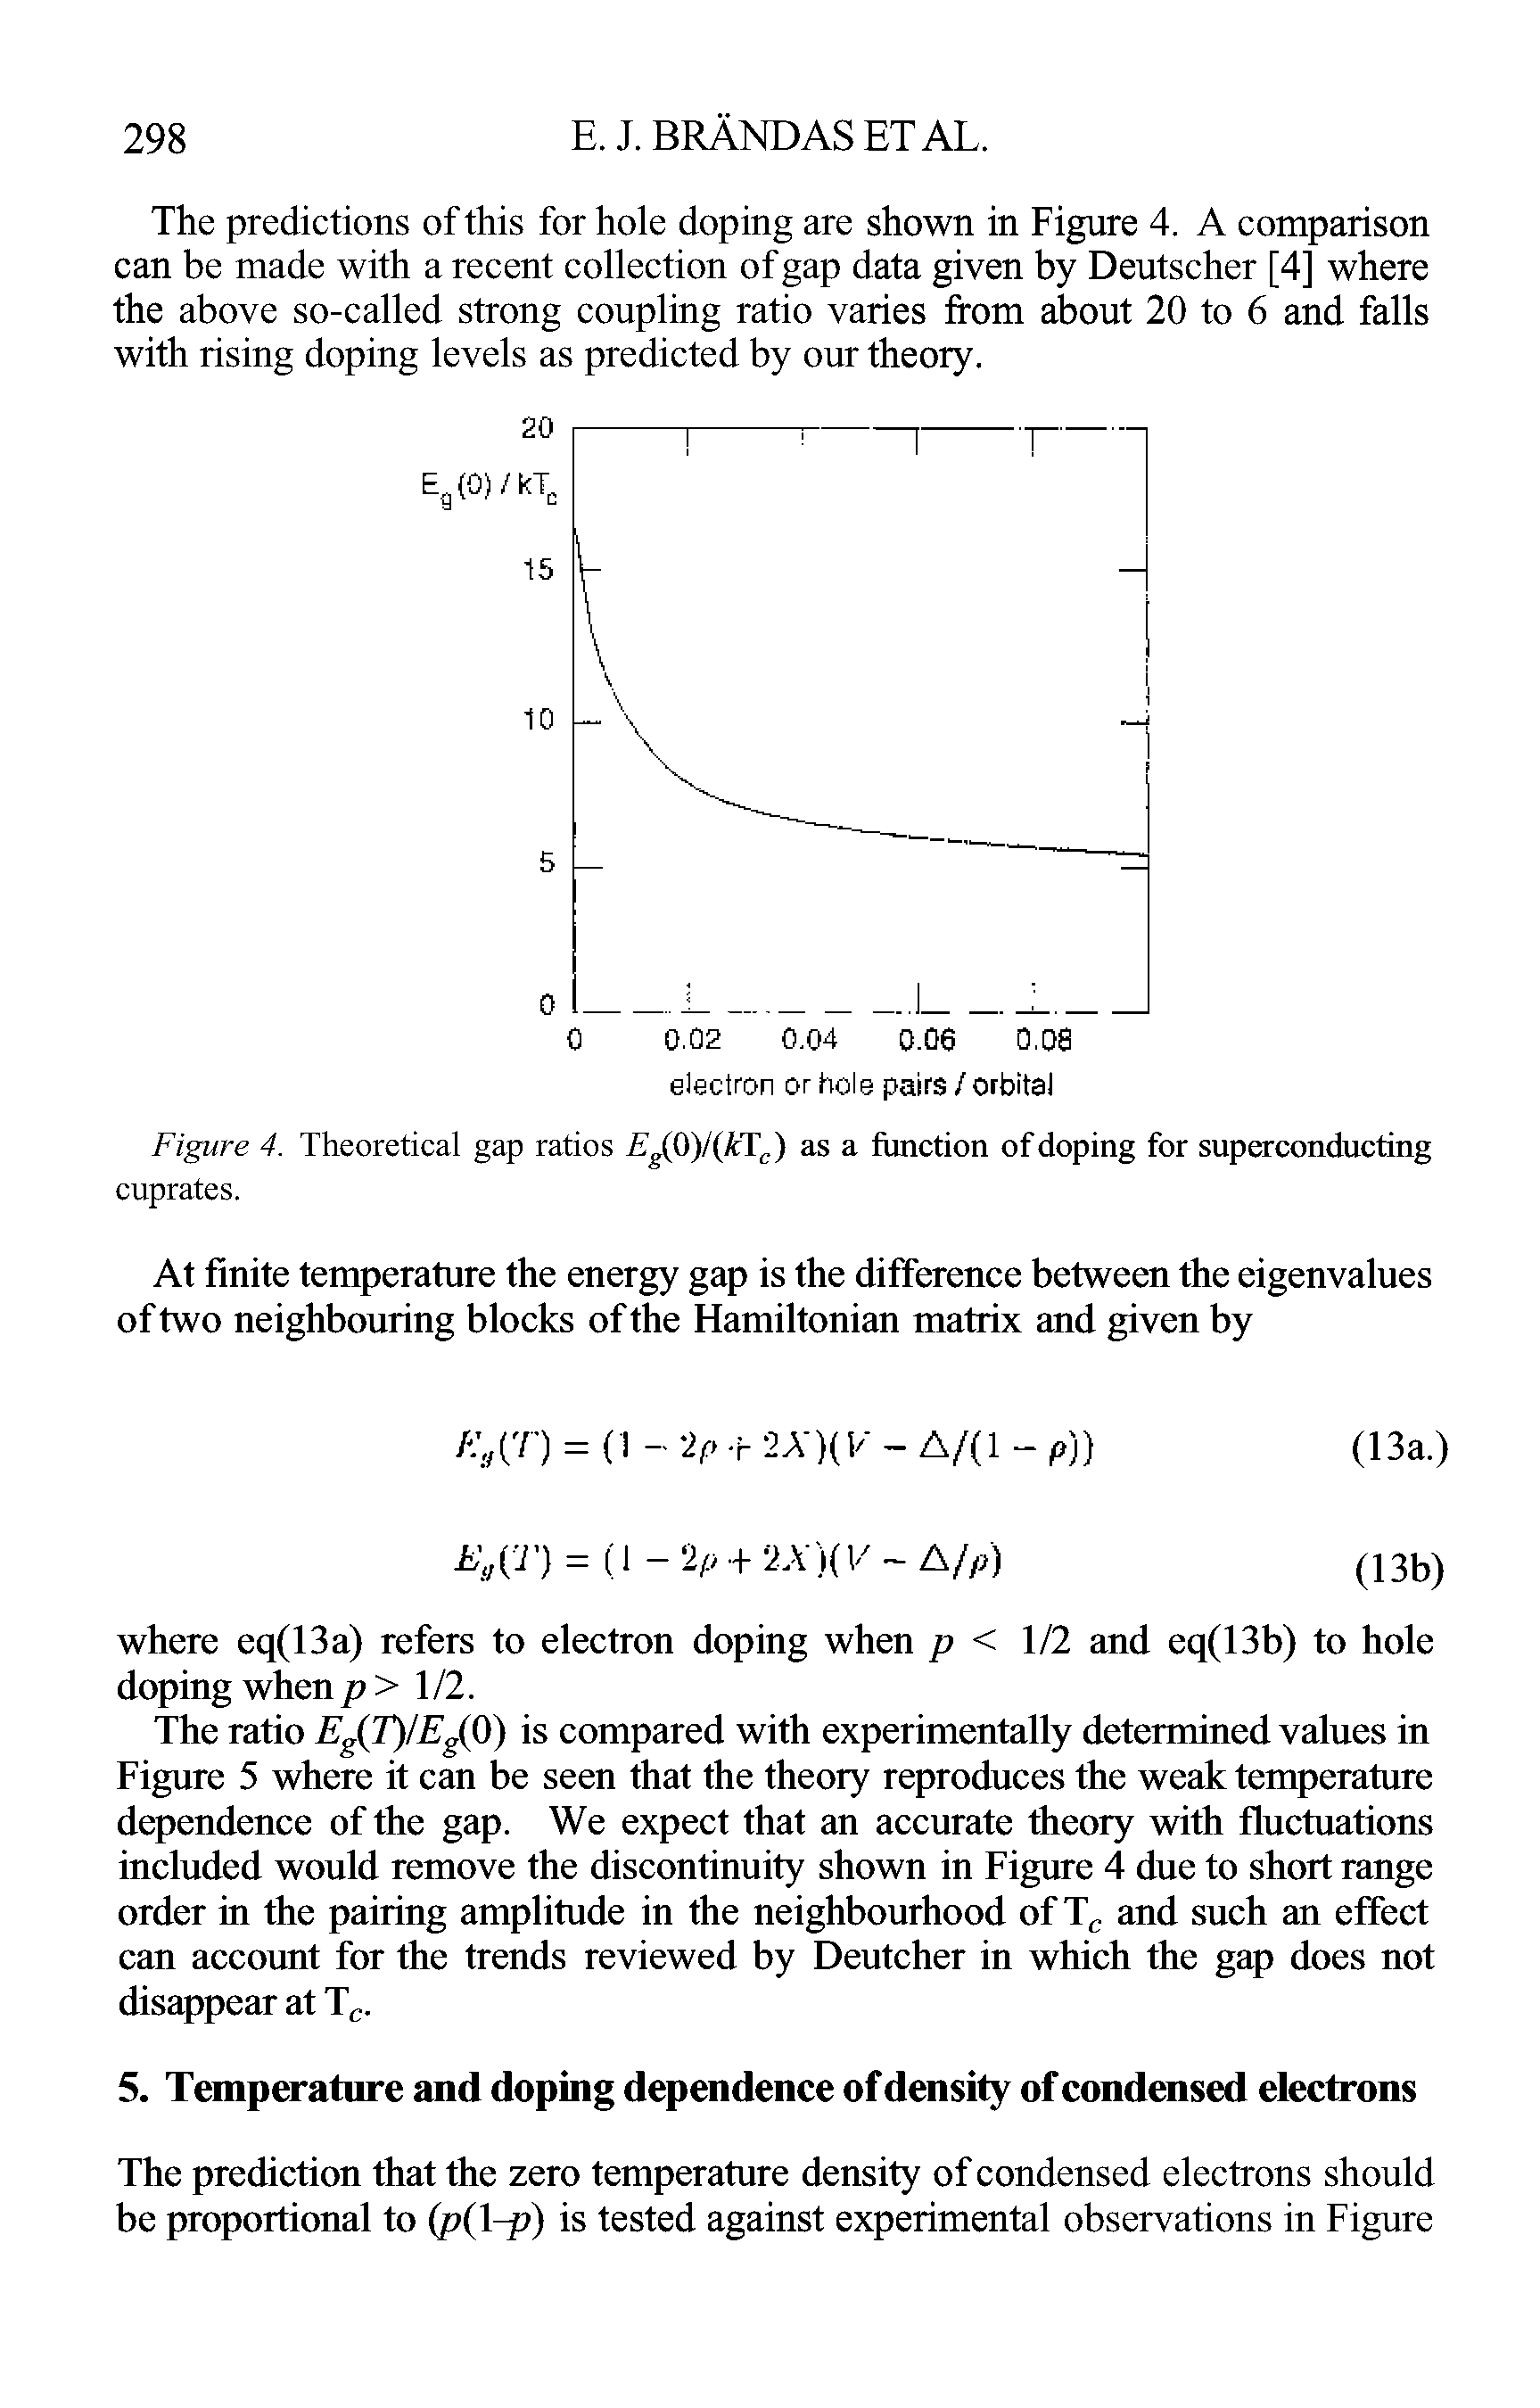 Figure 4. Theoretical gap ratios Eg(Q)/(kTc) as a function of doping for superconducting cuprates.